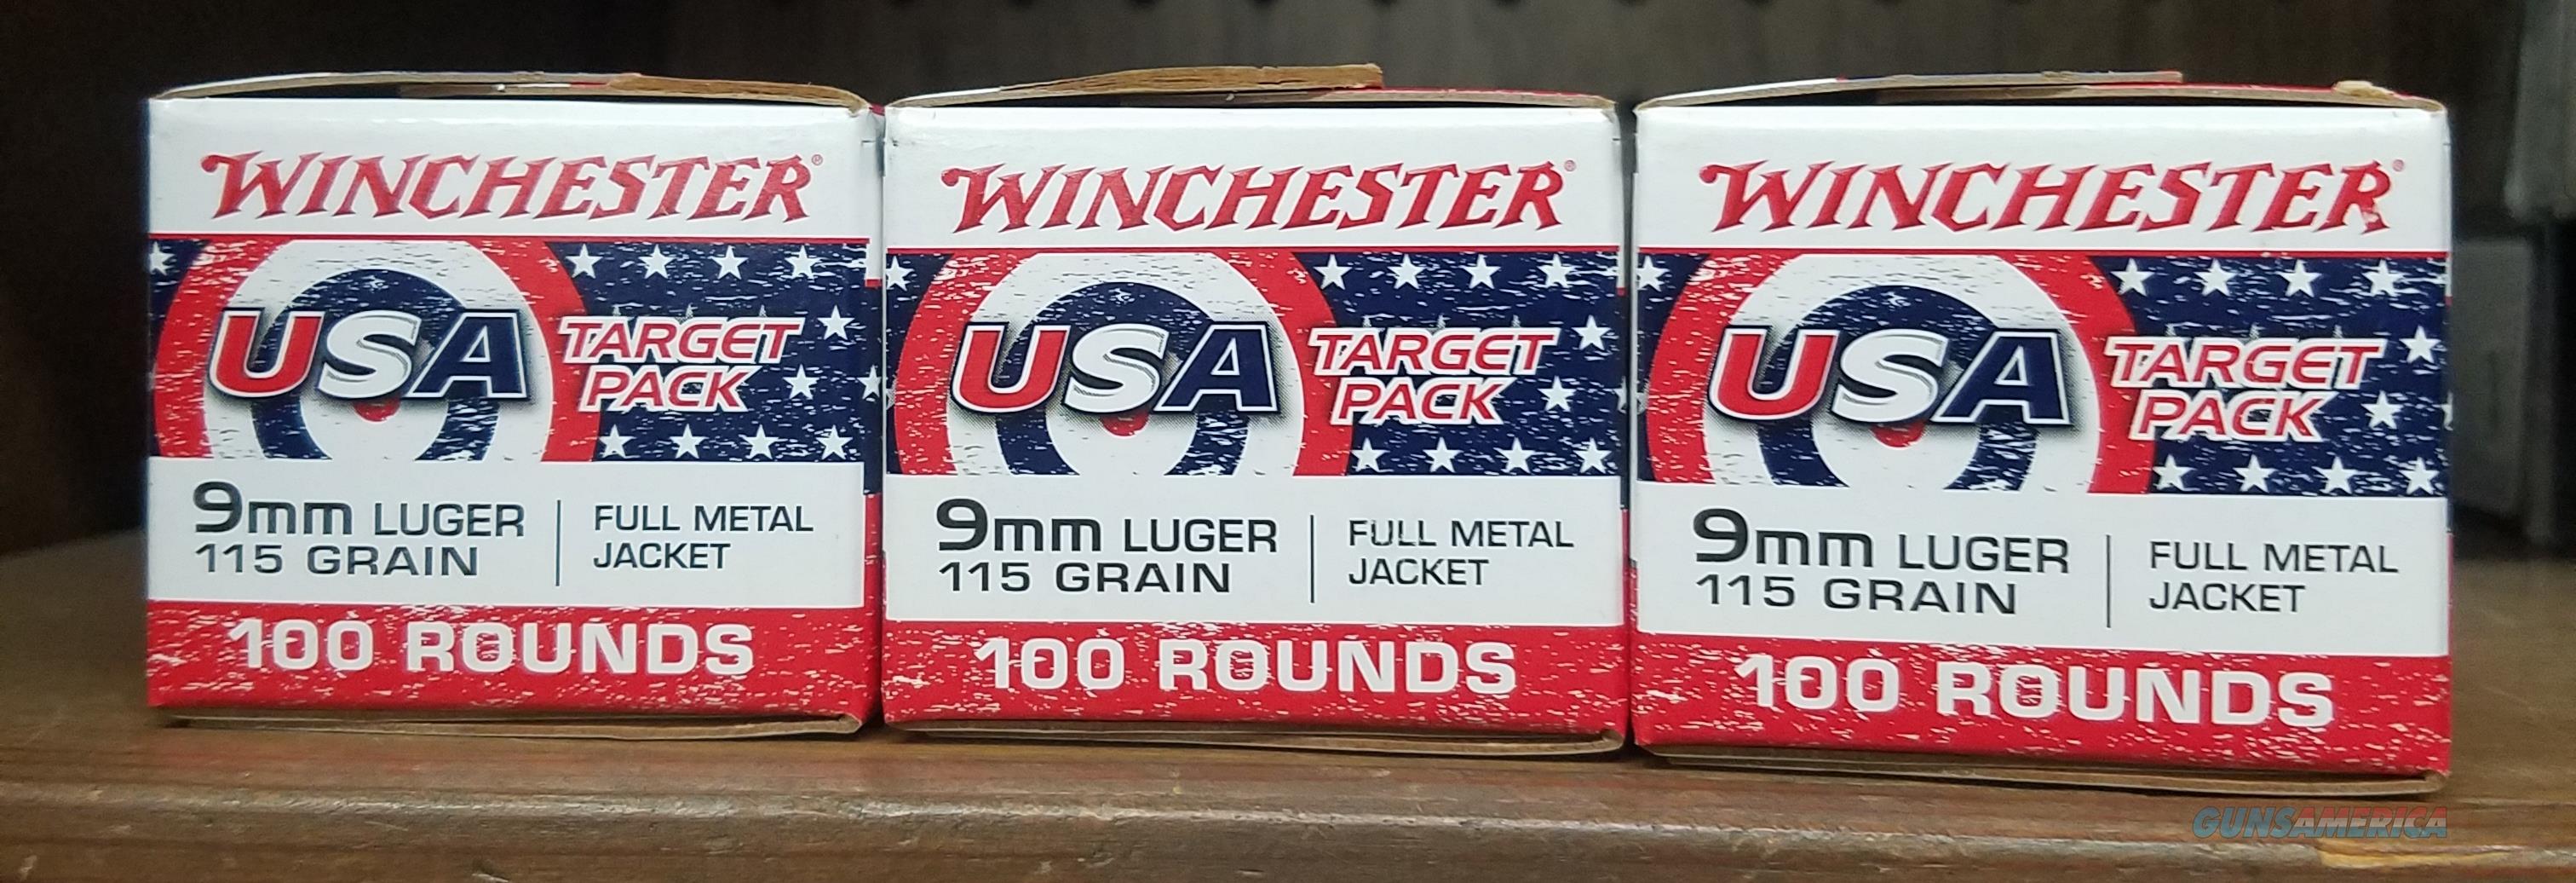 9mm ammo for sale and in stock